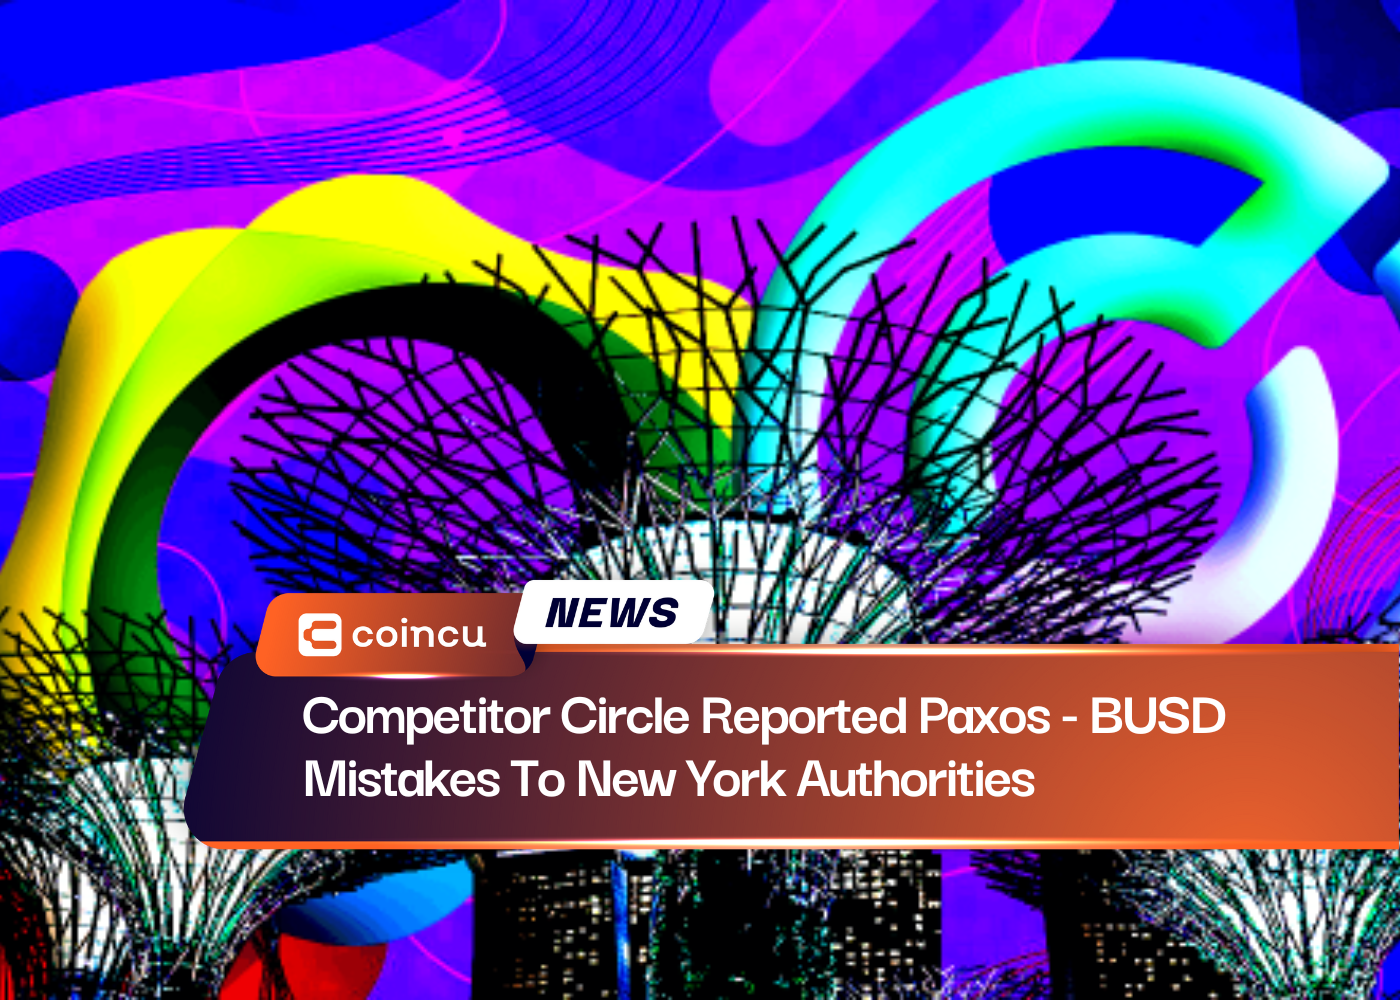 Competitor Circle Reported Paxos - BUSD Mistakes To New York Authorities